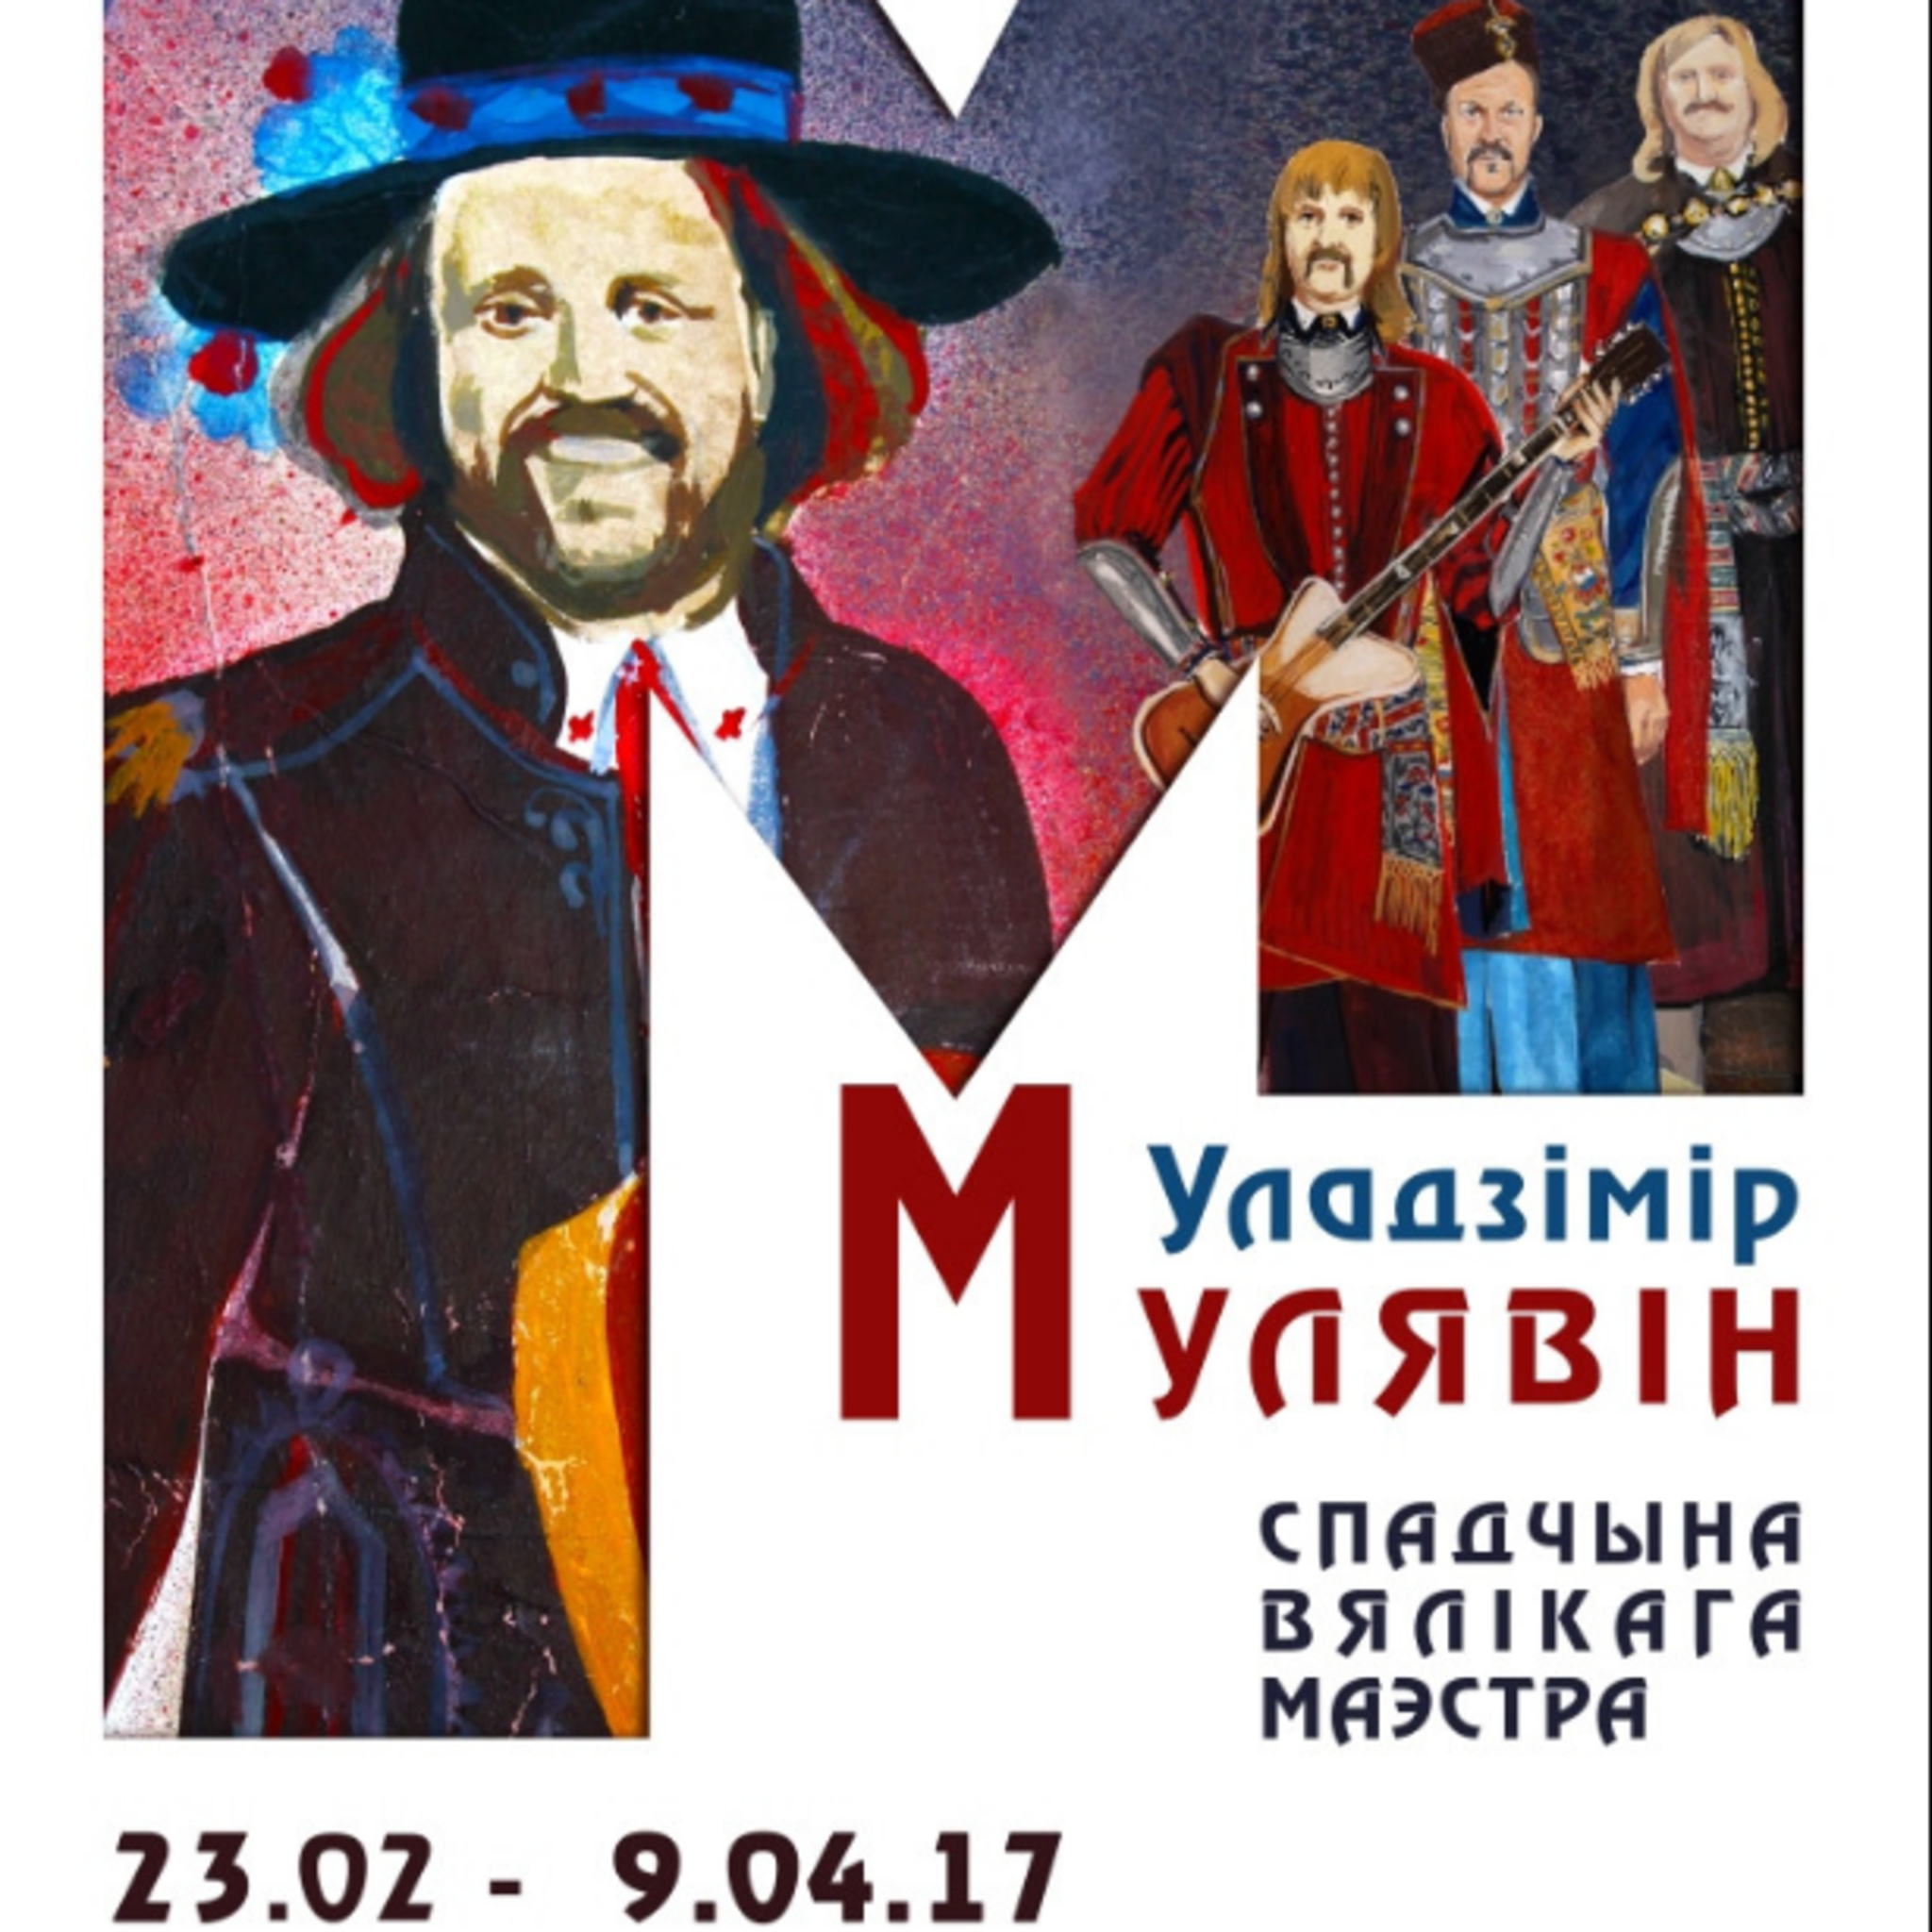 The exhibition Vladimir Mulyavin. The legacy of the great maestro